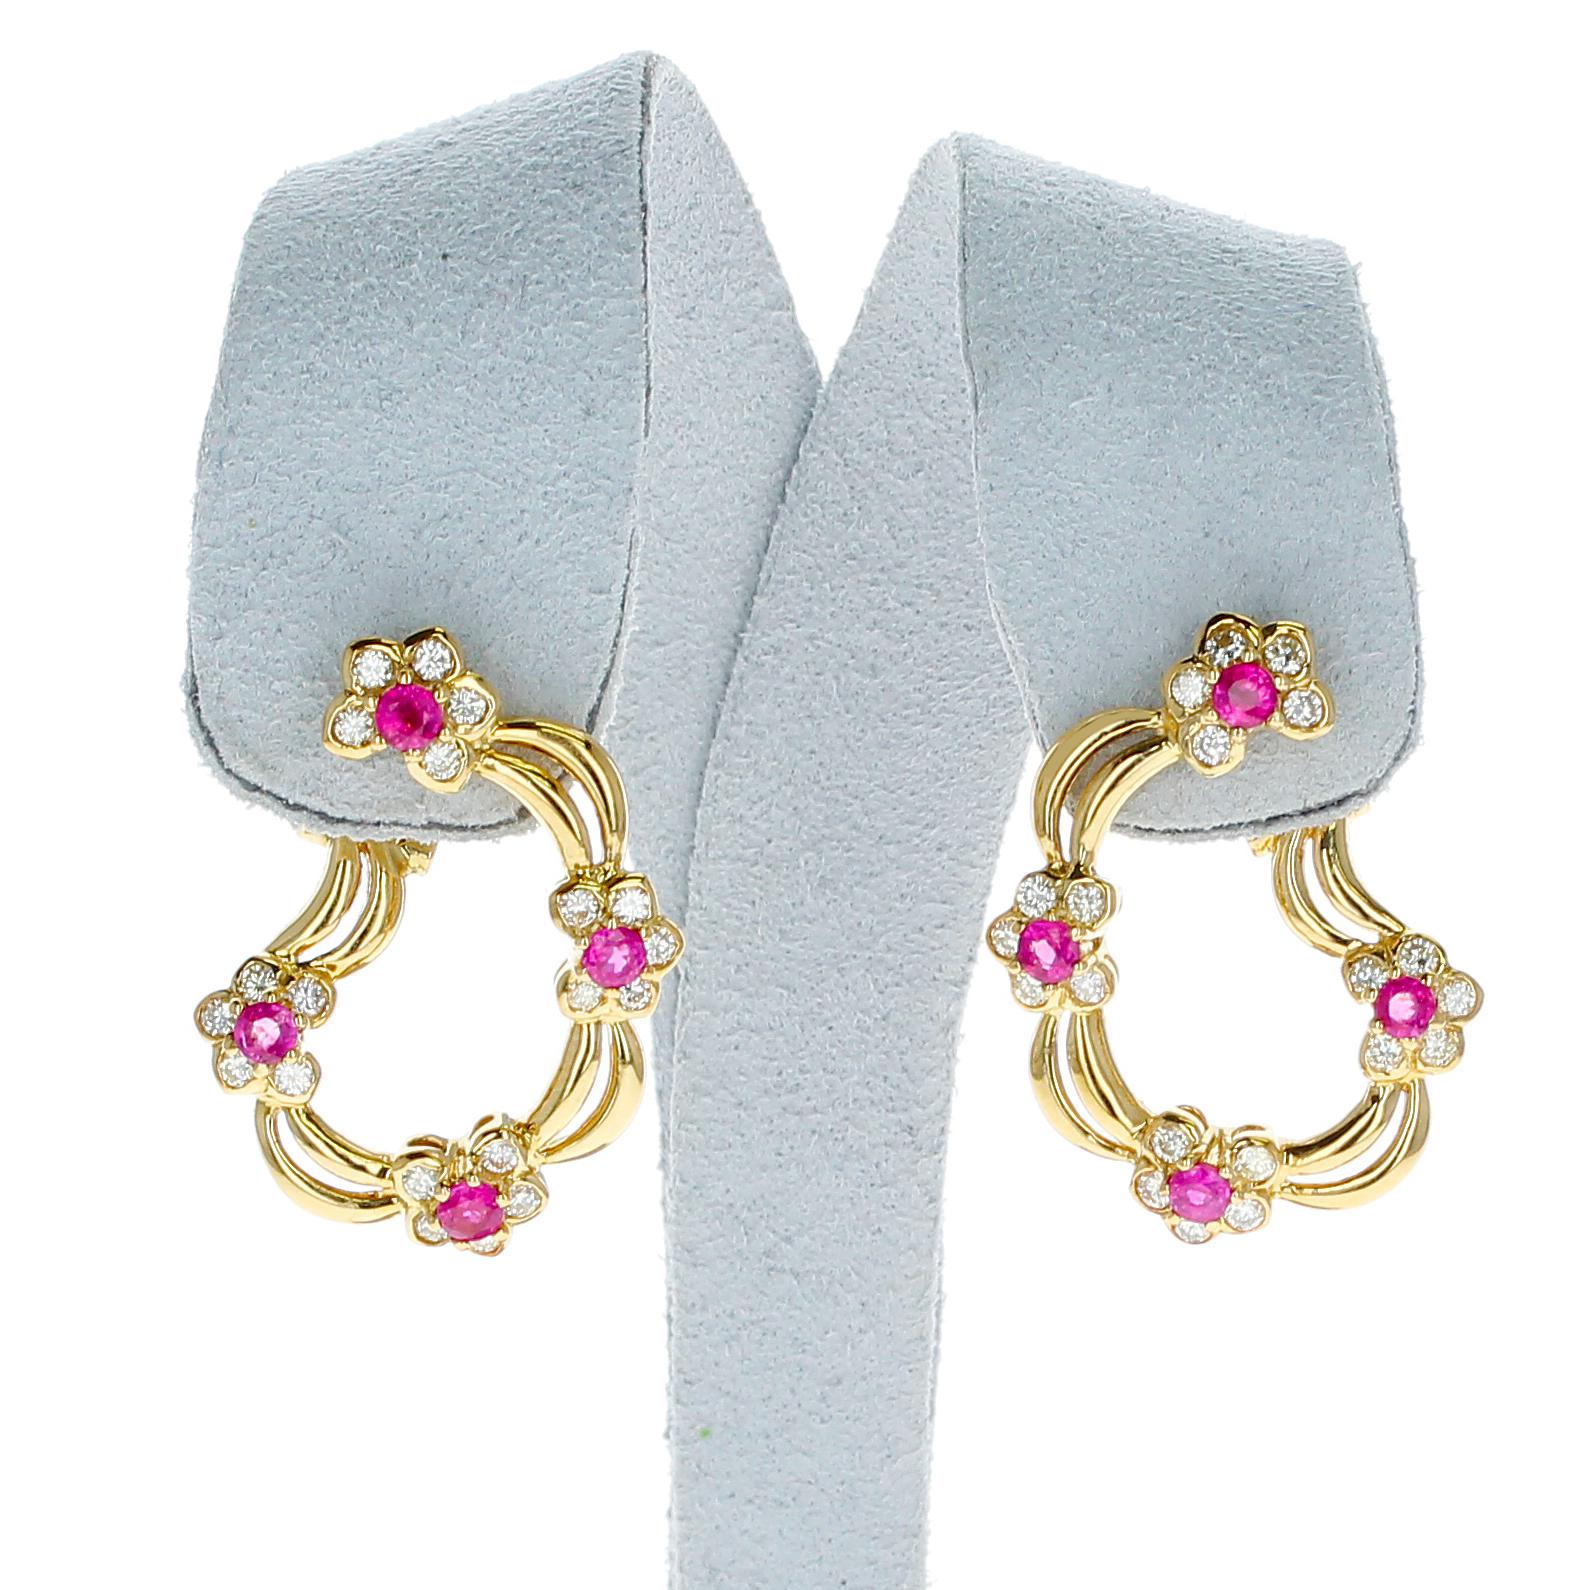 A pair of Four Flower Ruby and Diamond Floral Clip-on Earrings made in 18 Karat Yellow Gold. The total weight of the earrings are 13.25 grams. 